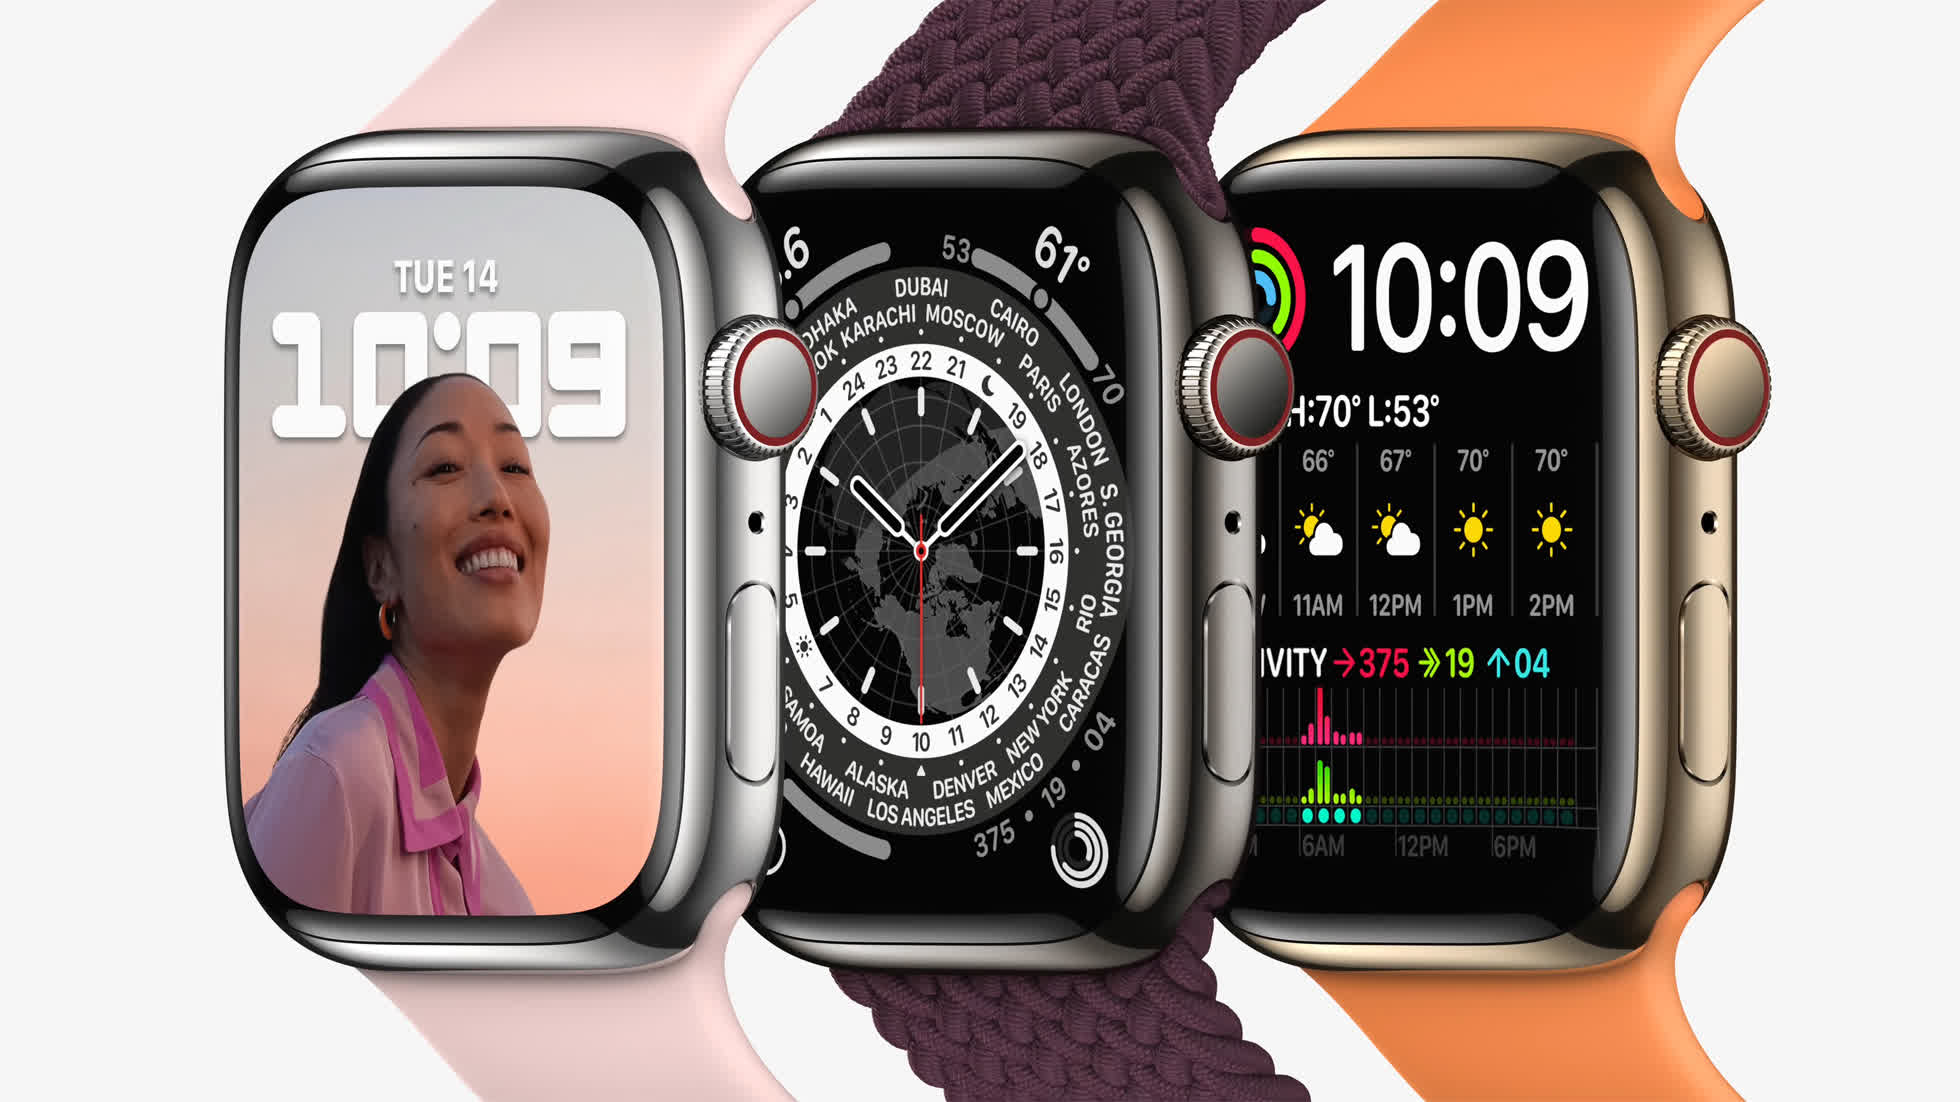 The Apple Watch Series 7 is larger, curvier, and smarter